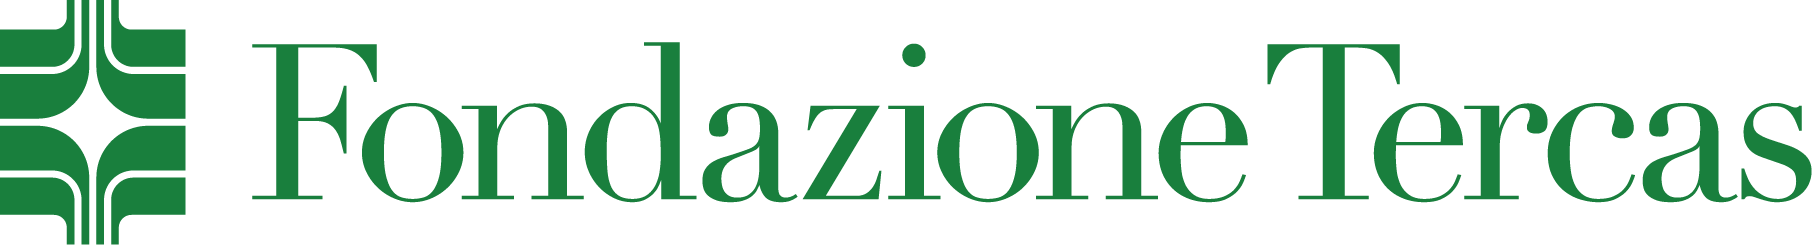 Logo-orizzontale-png.png